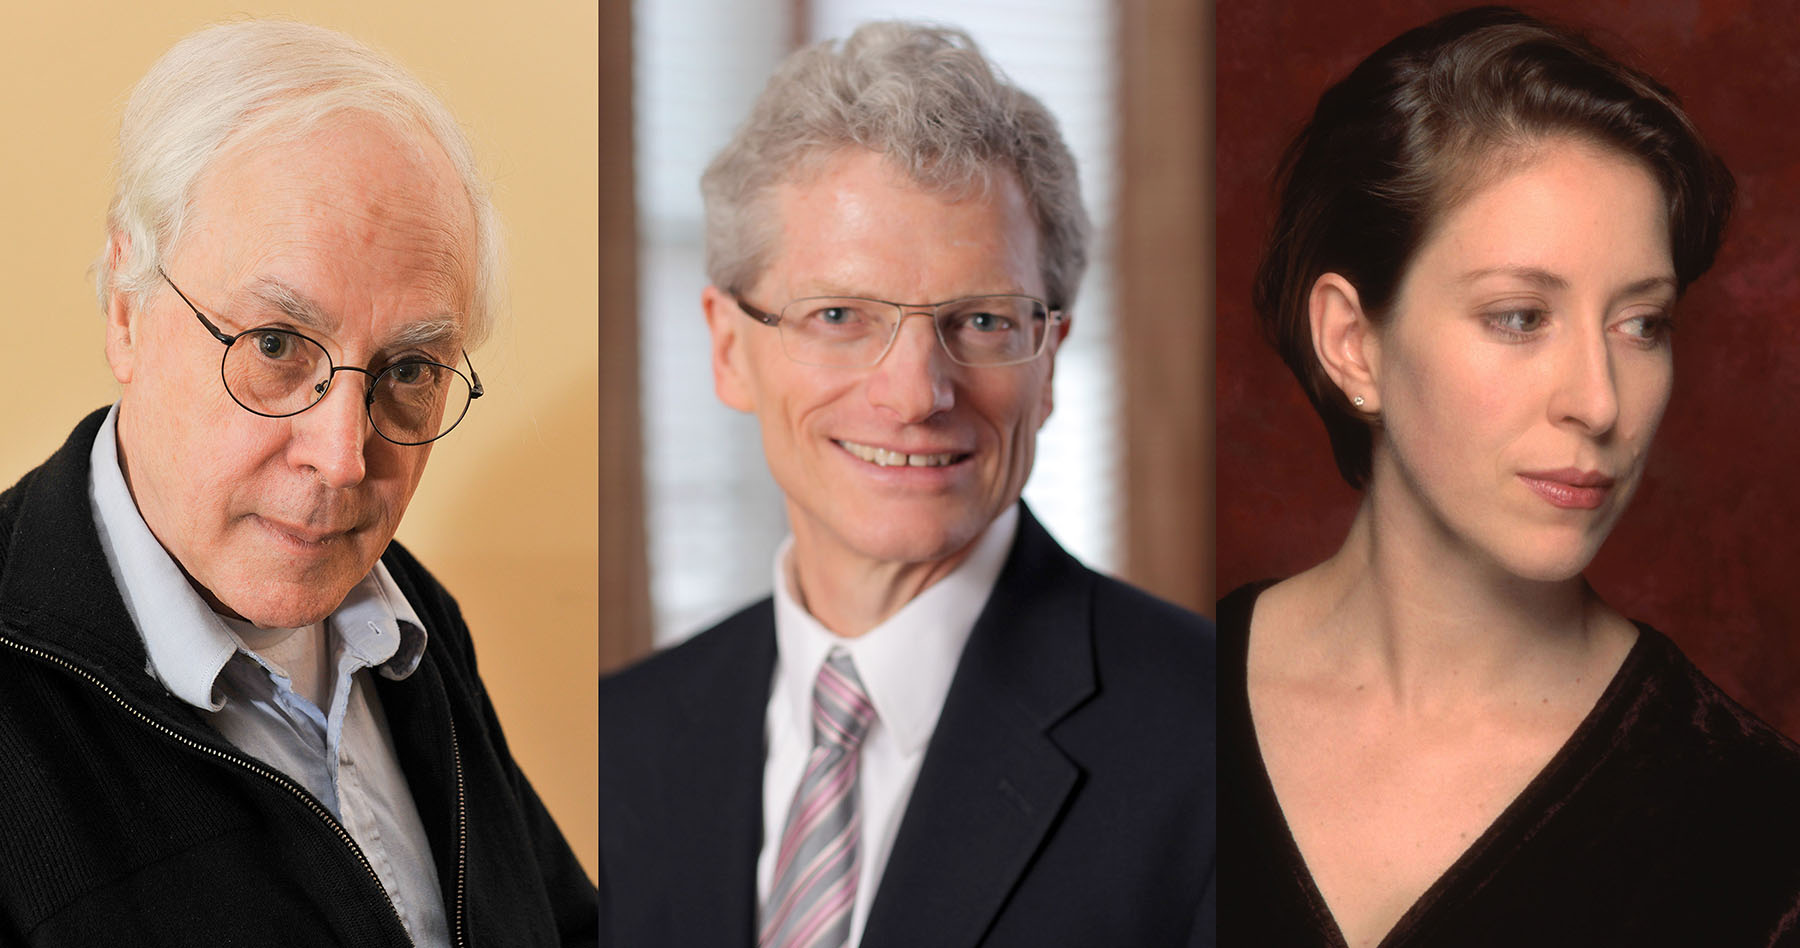 MODfest will feature premieres of compositions by Professor Emeritus of Music Richard Wilson and professors Susan Botti and Jonathan Chenette.